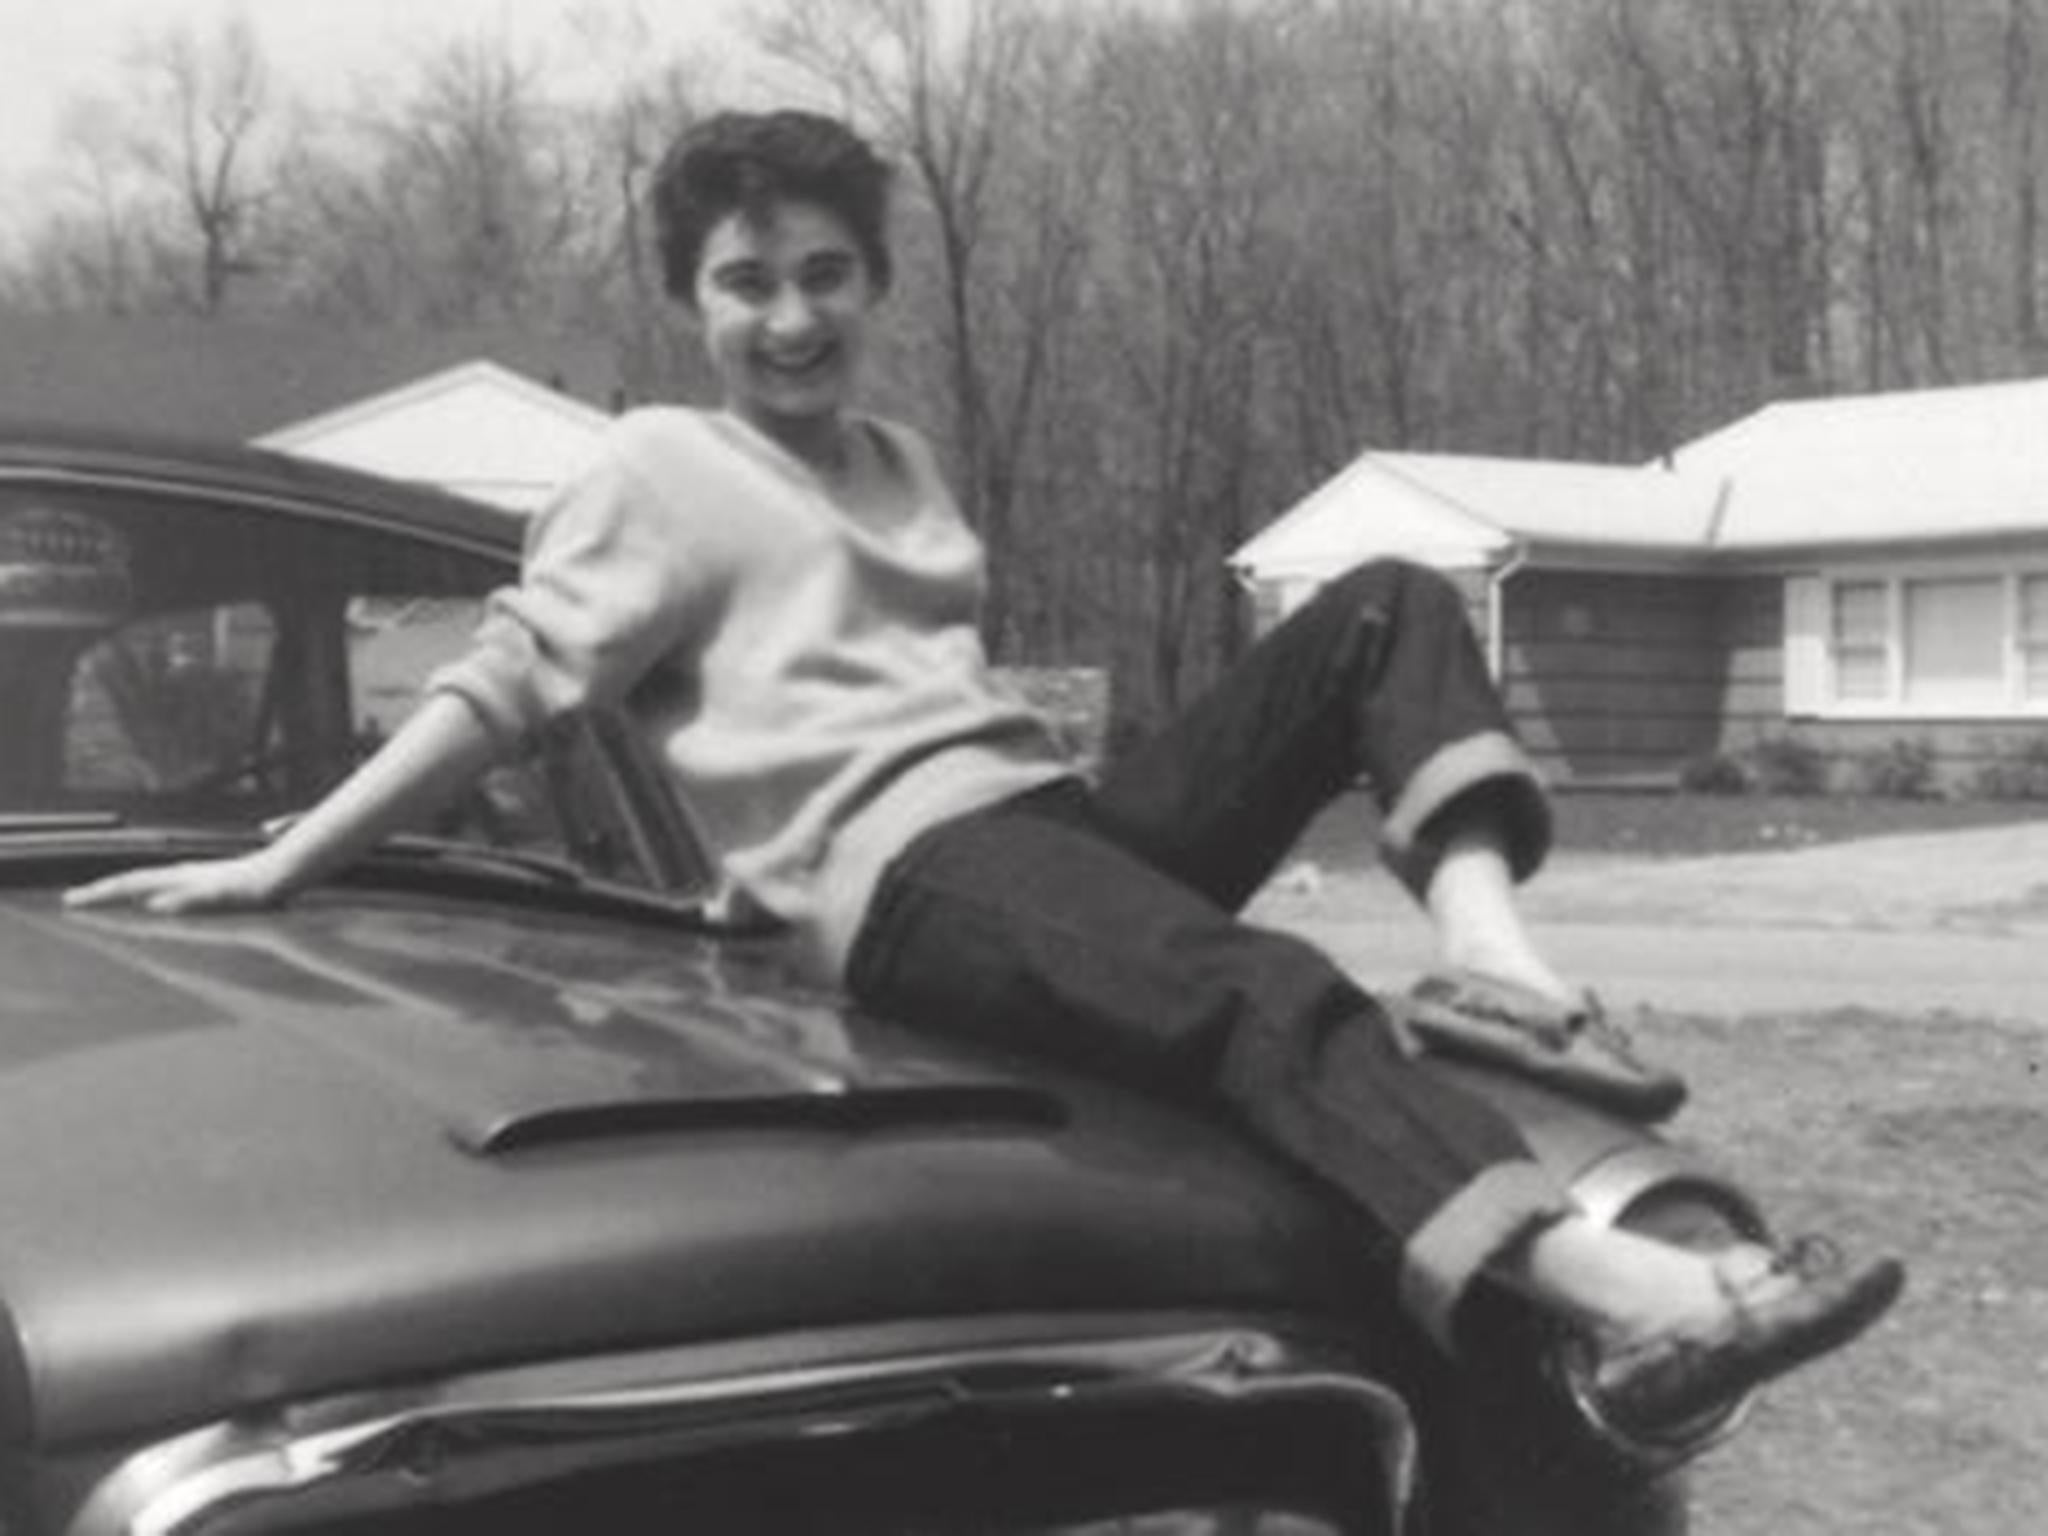 The iconic death and little-known life of Kitty Genovese, reportedly murdered in front of 38 witnesses in 1964